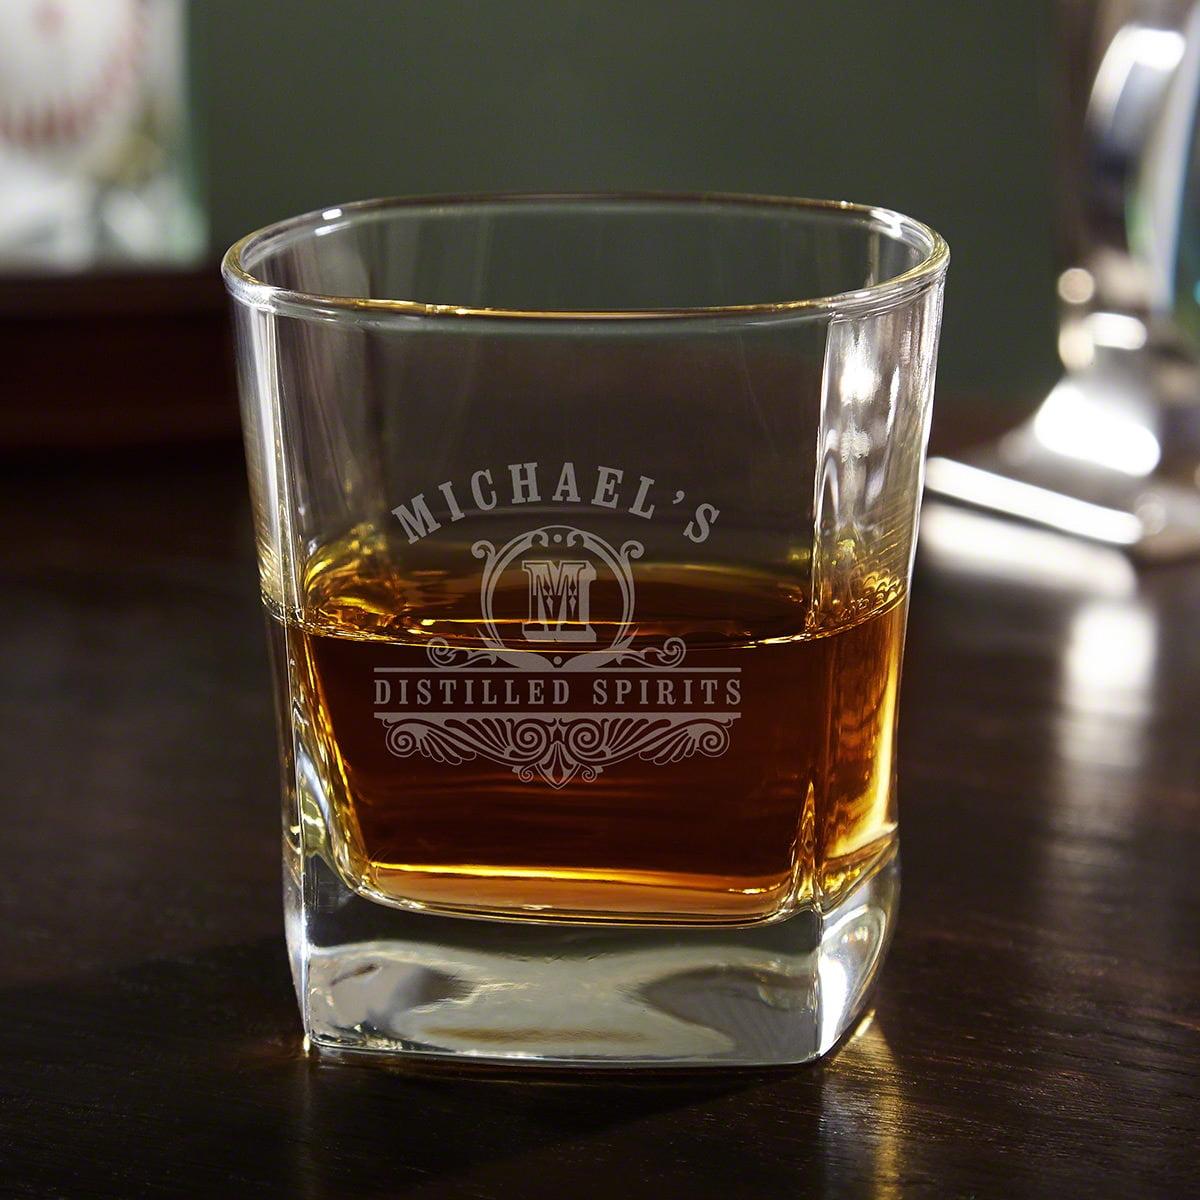 Carraway Personalized Square Whiskey Glass, Clear